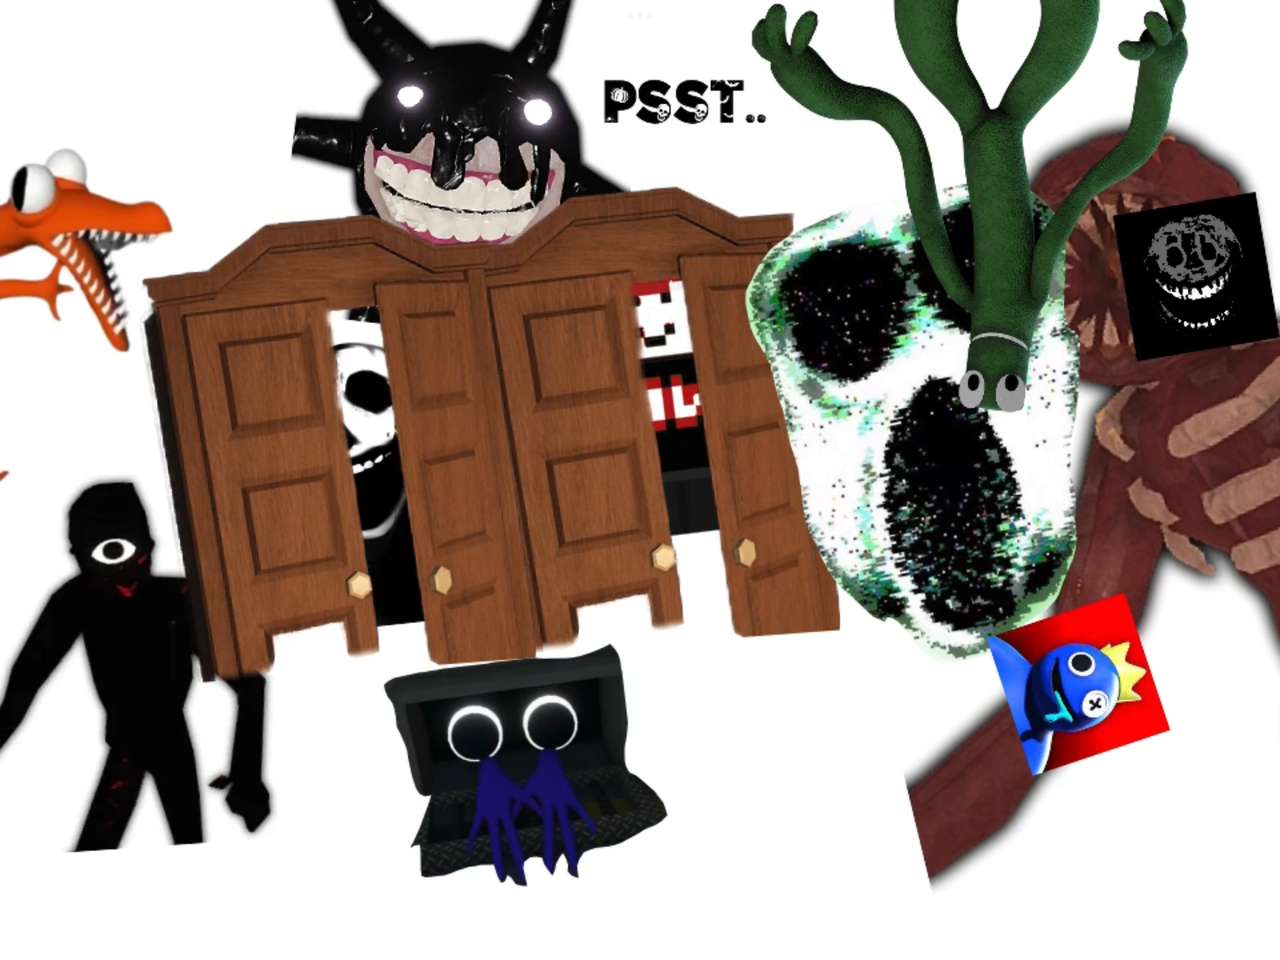 Let's See Which Rainbow Friend You Would Be If They Were In The Roblox Doors  Game! 